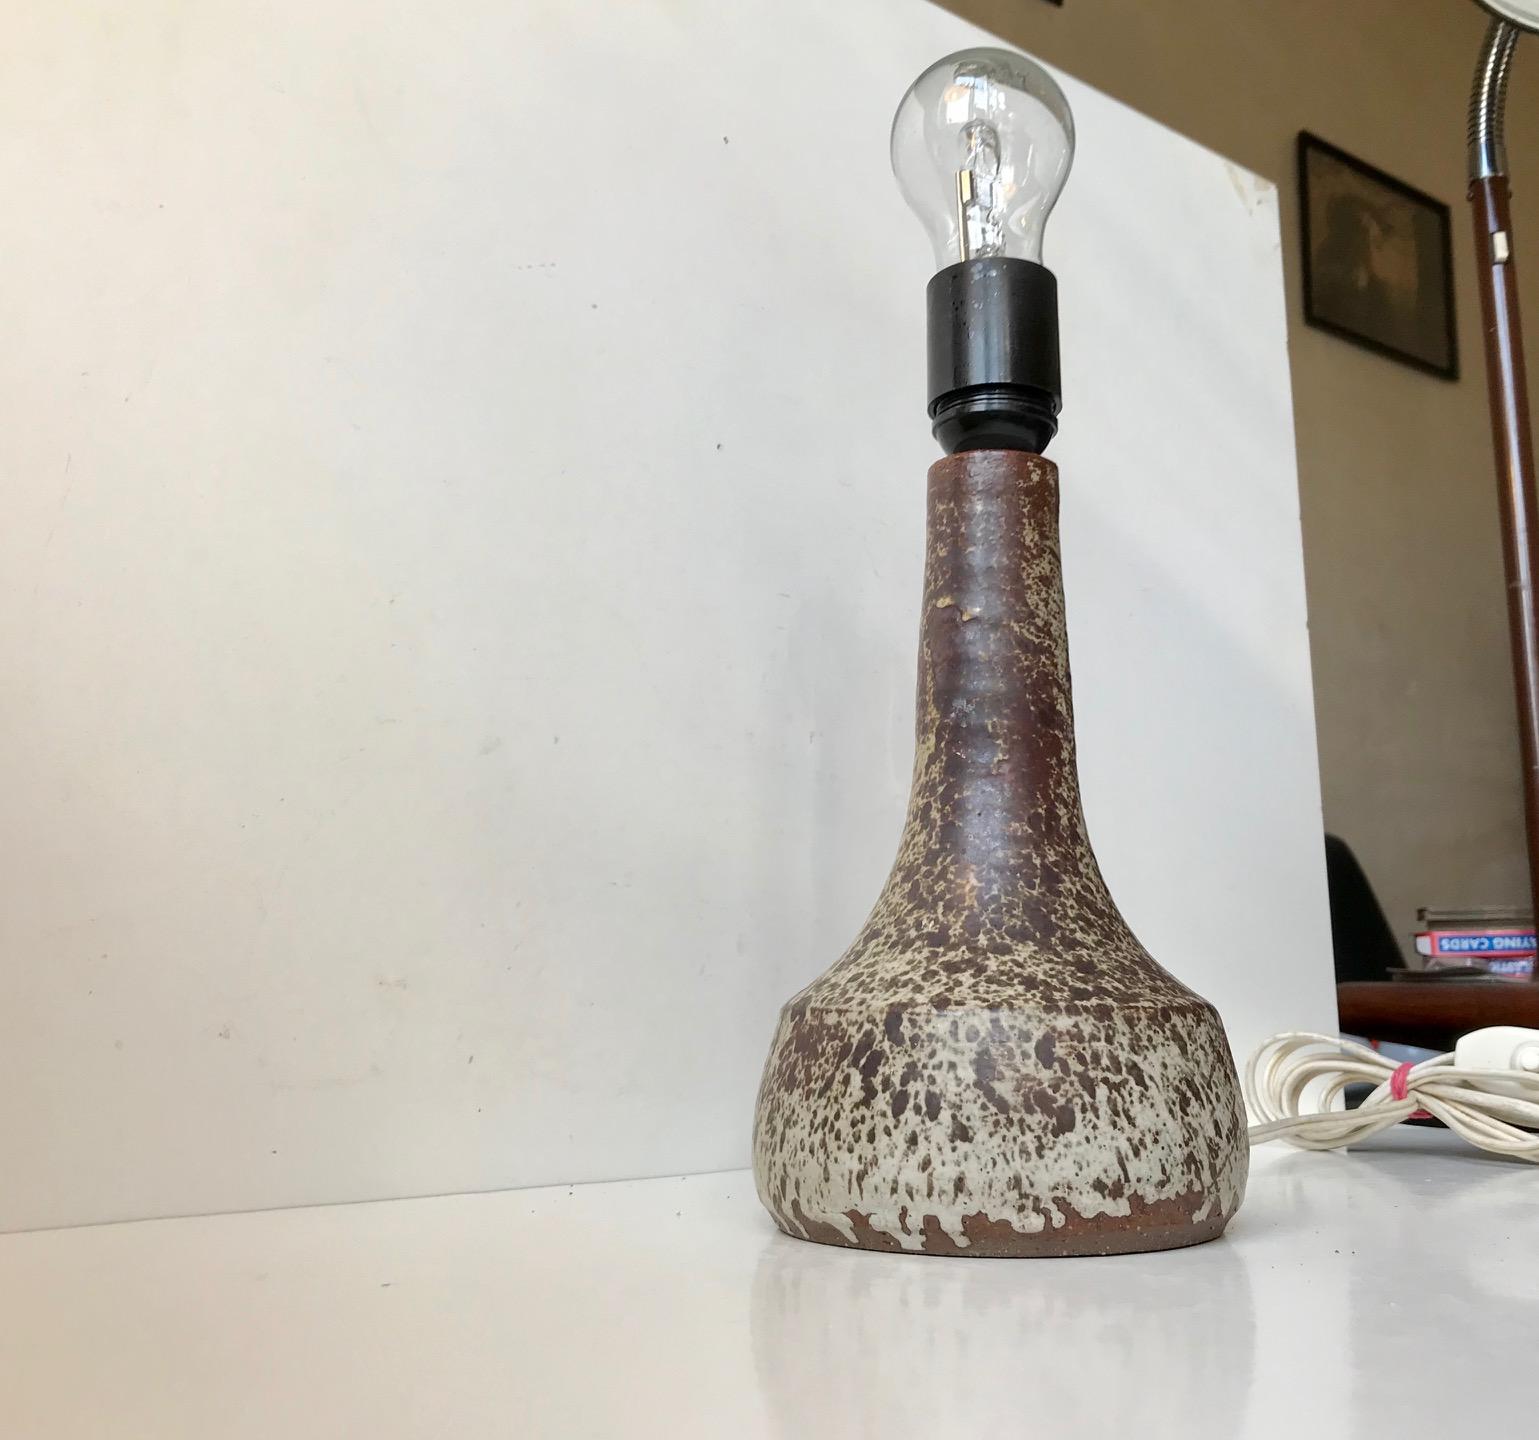 Unusually glazed ceramic table light decorated in earthy speckled glazes. It has no signature or markings but it was probably made by Knabstrup in Denmark during the 1960s who frequently used stickers during this period. The styling of this light is